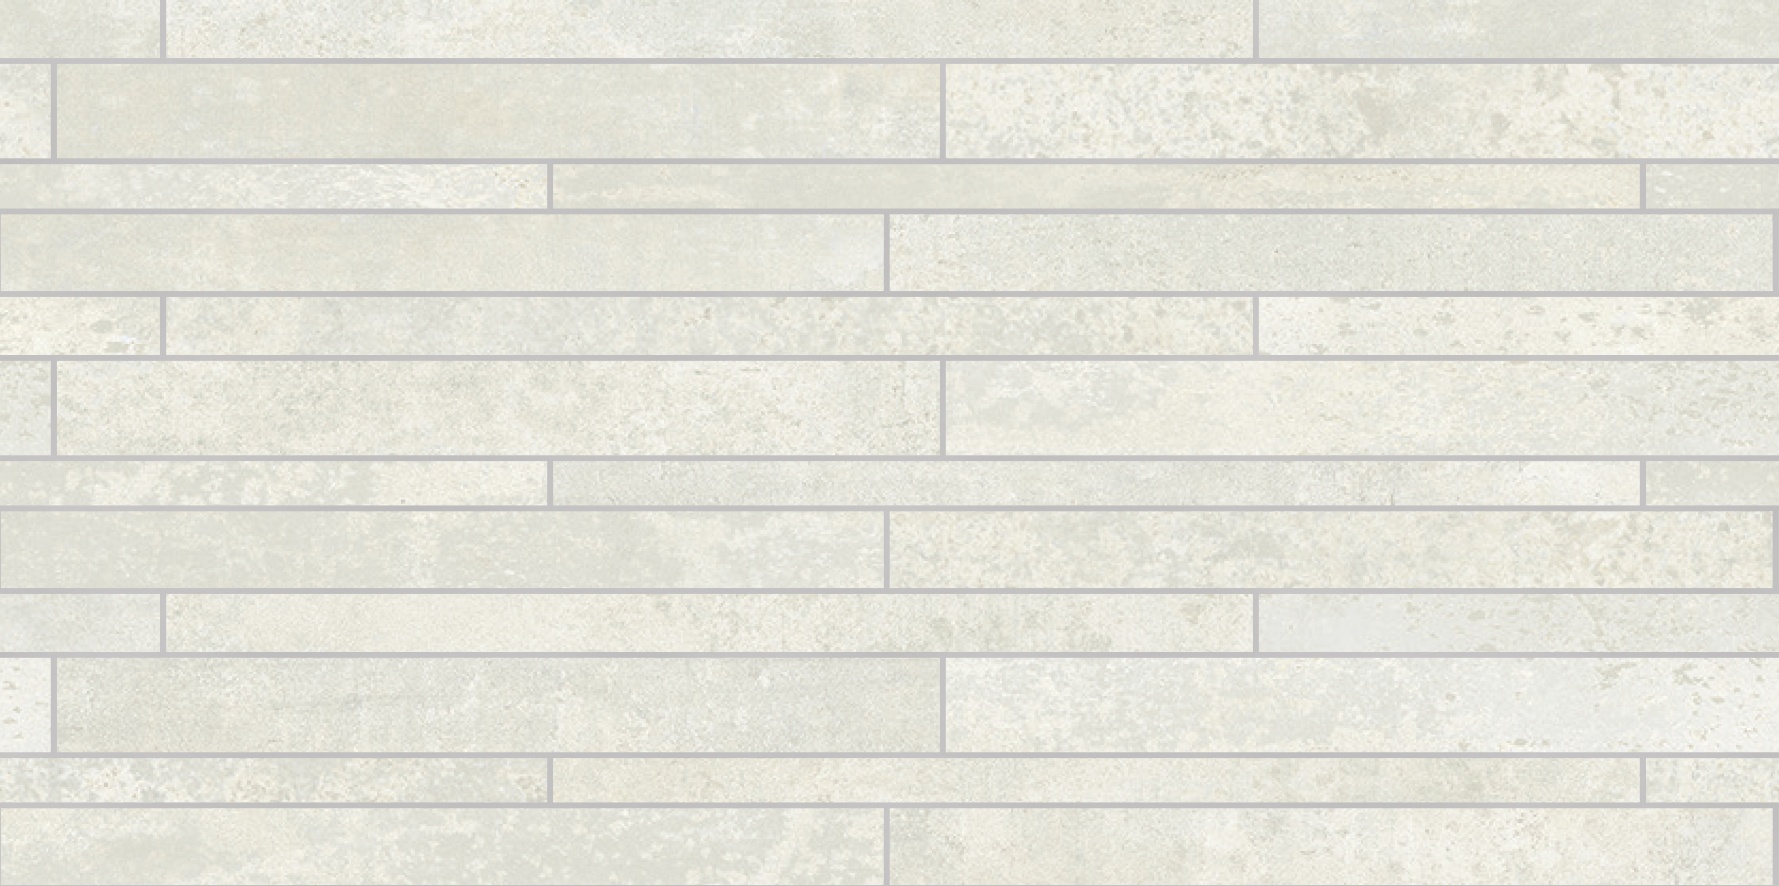 Novabell Oxy Bianco Naturale Bianco FRY886N natur 30x60cm Muretto